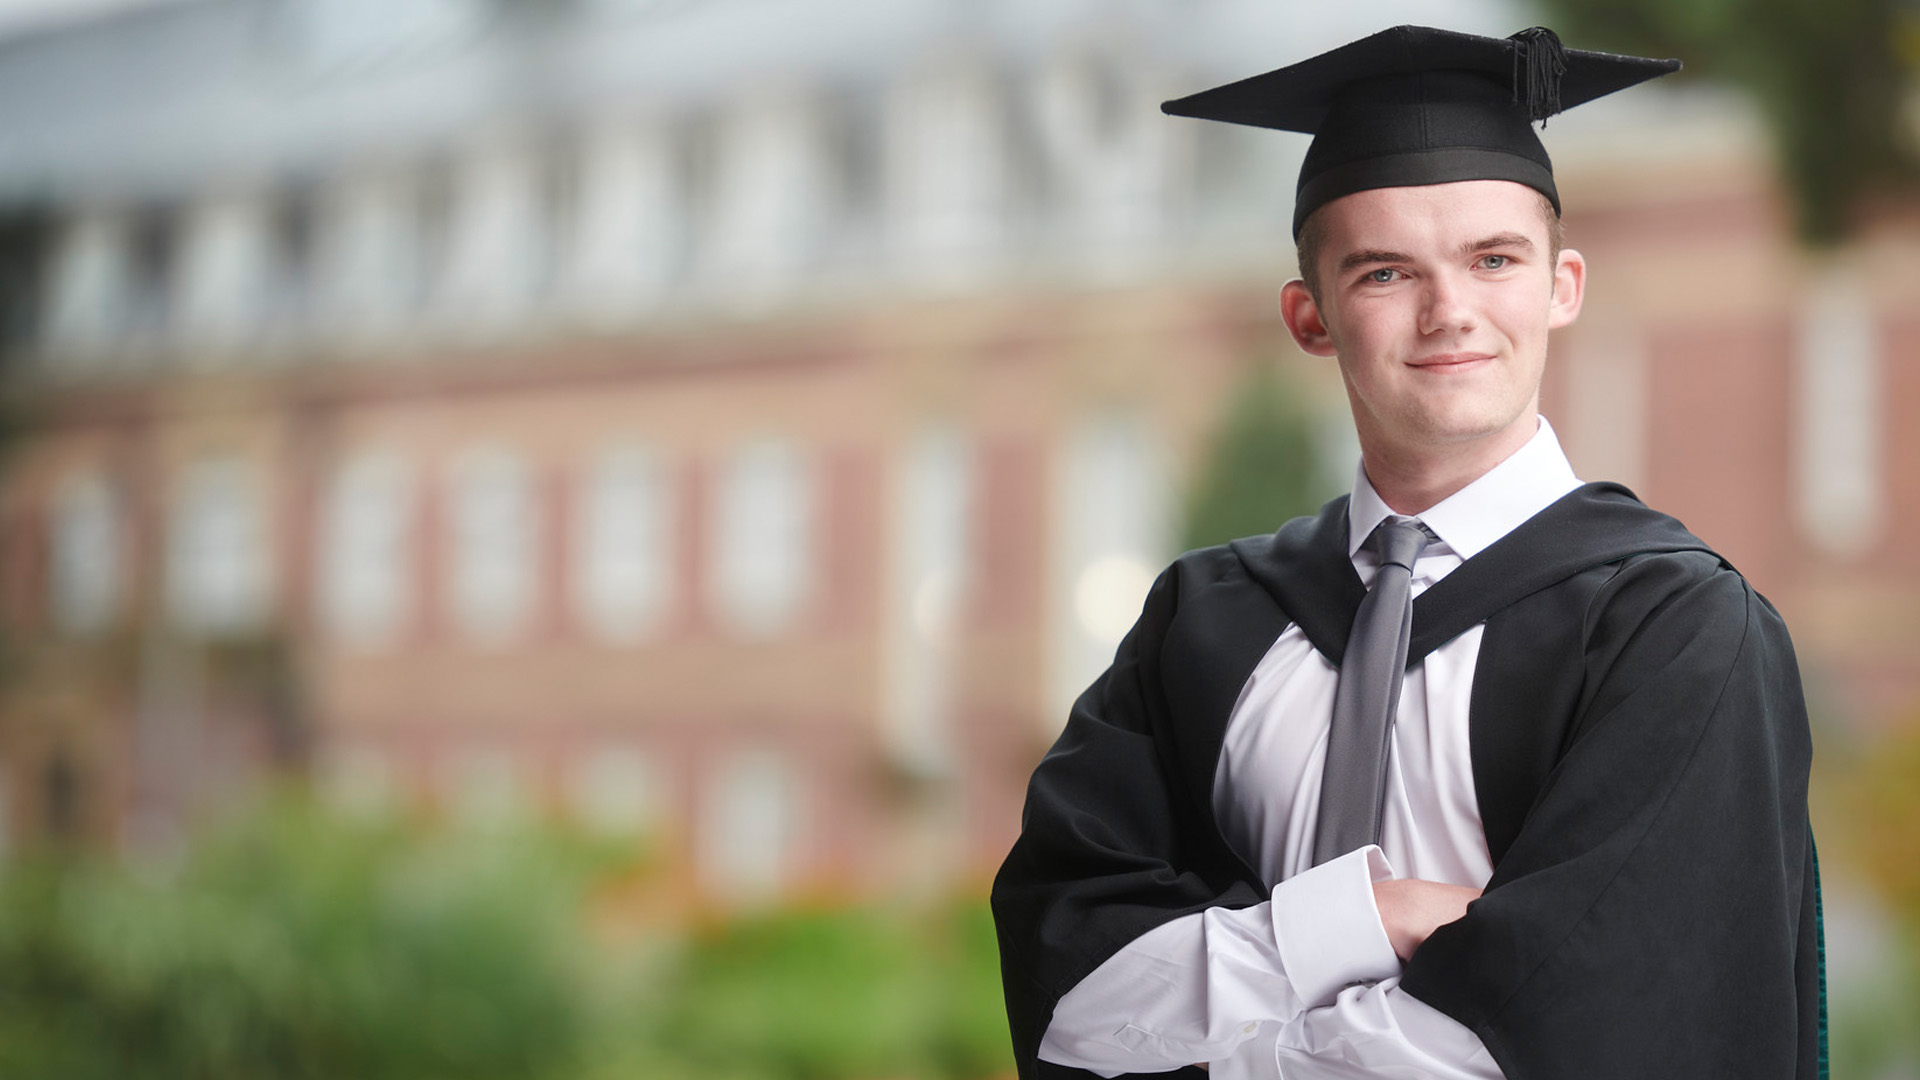 joseph green wearing a cap and gown and smiling with arms folded.